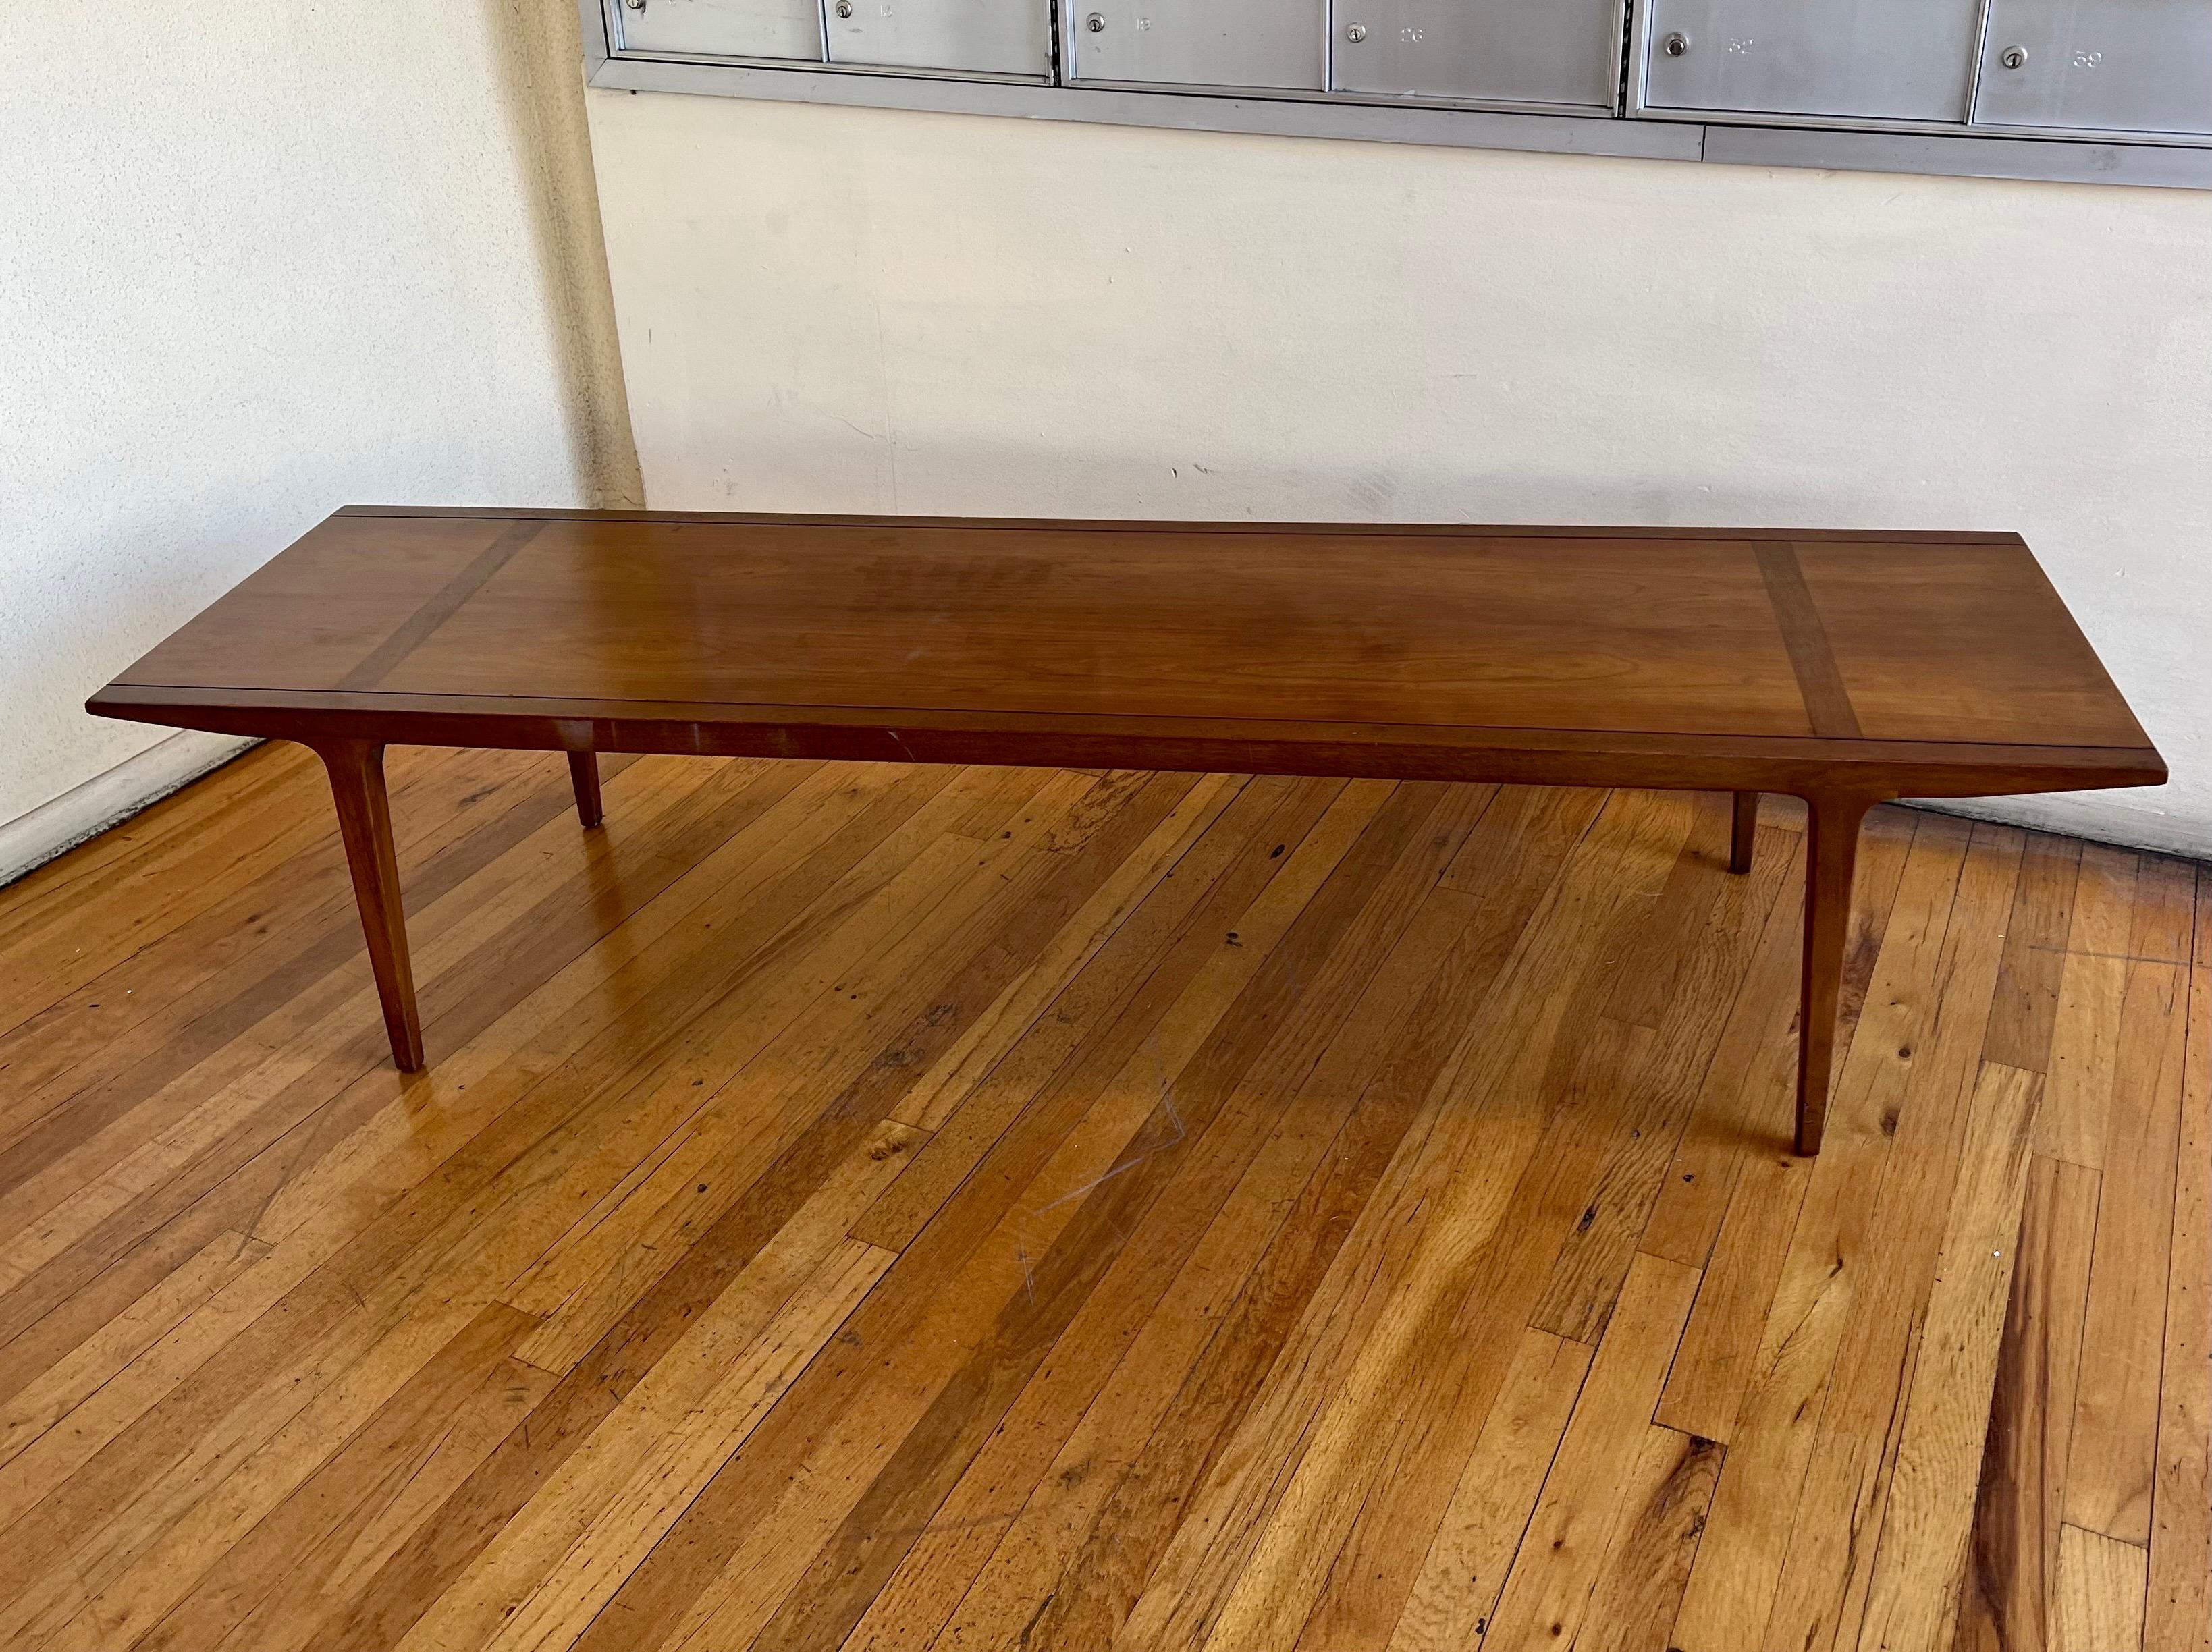 Mid-Century Modern coffee table was designed by American designer John Van Koert and manufactured by Drexel in the United States in the 1950s. Made of walnut wood, this coffee table’s gentle curves, clean lines, and four smooth tapered legs make